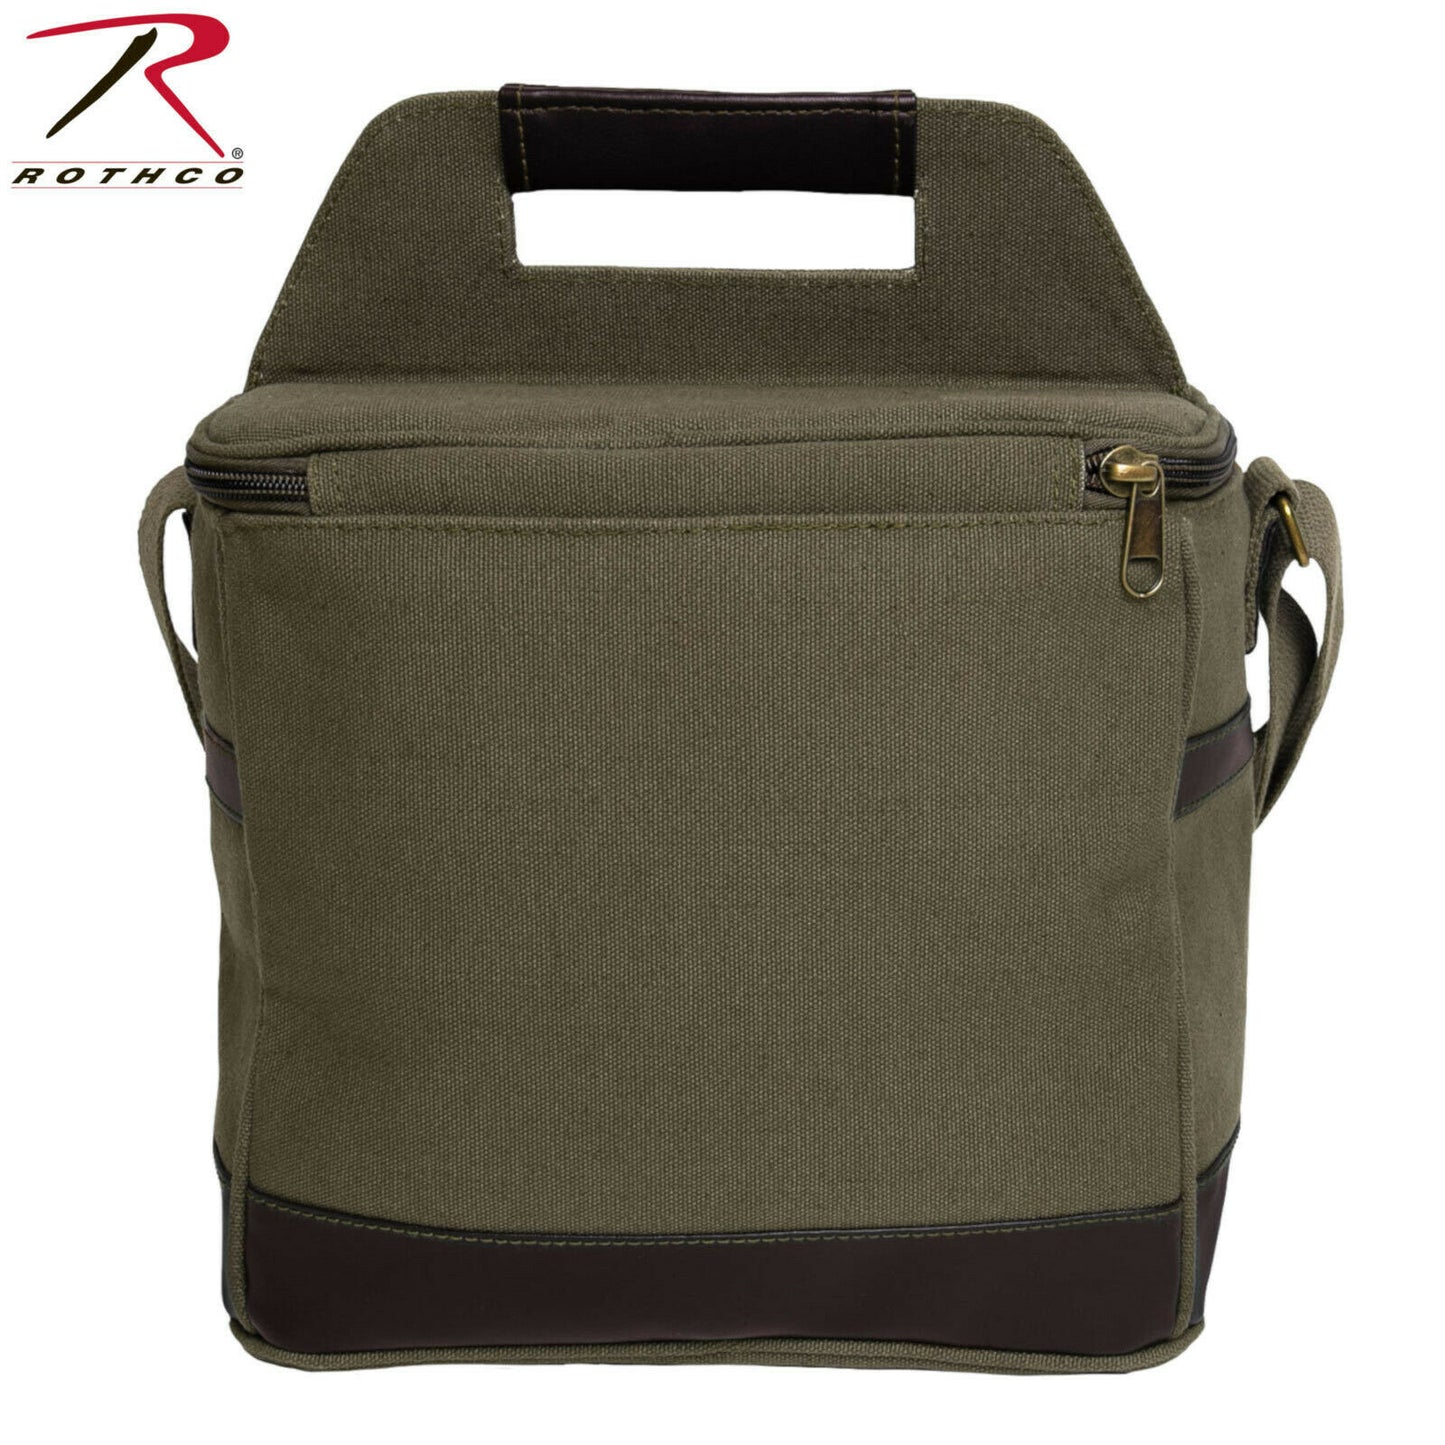 Rothco Canvas & Leather Insulated Travel Cooler Bag - Perfect For Soda Beer Food